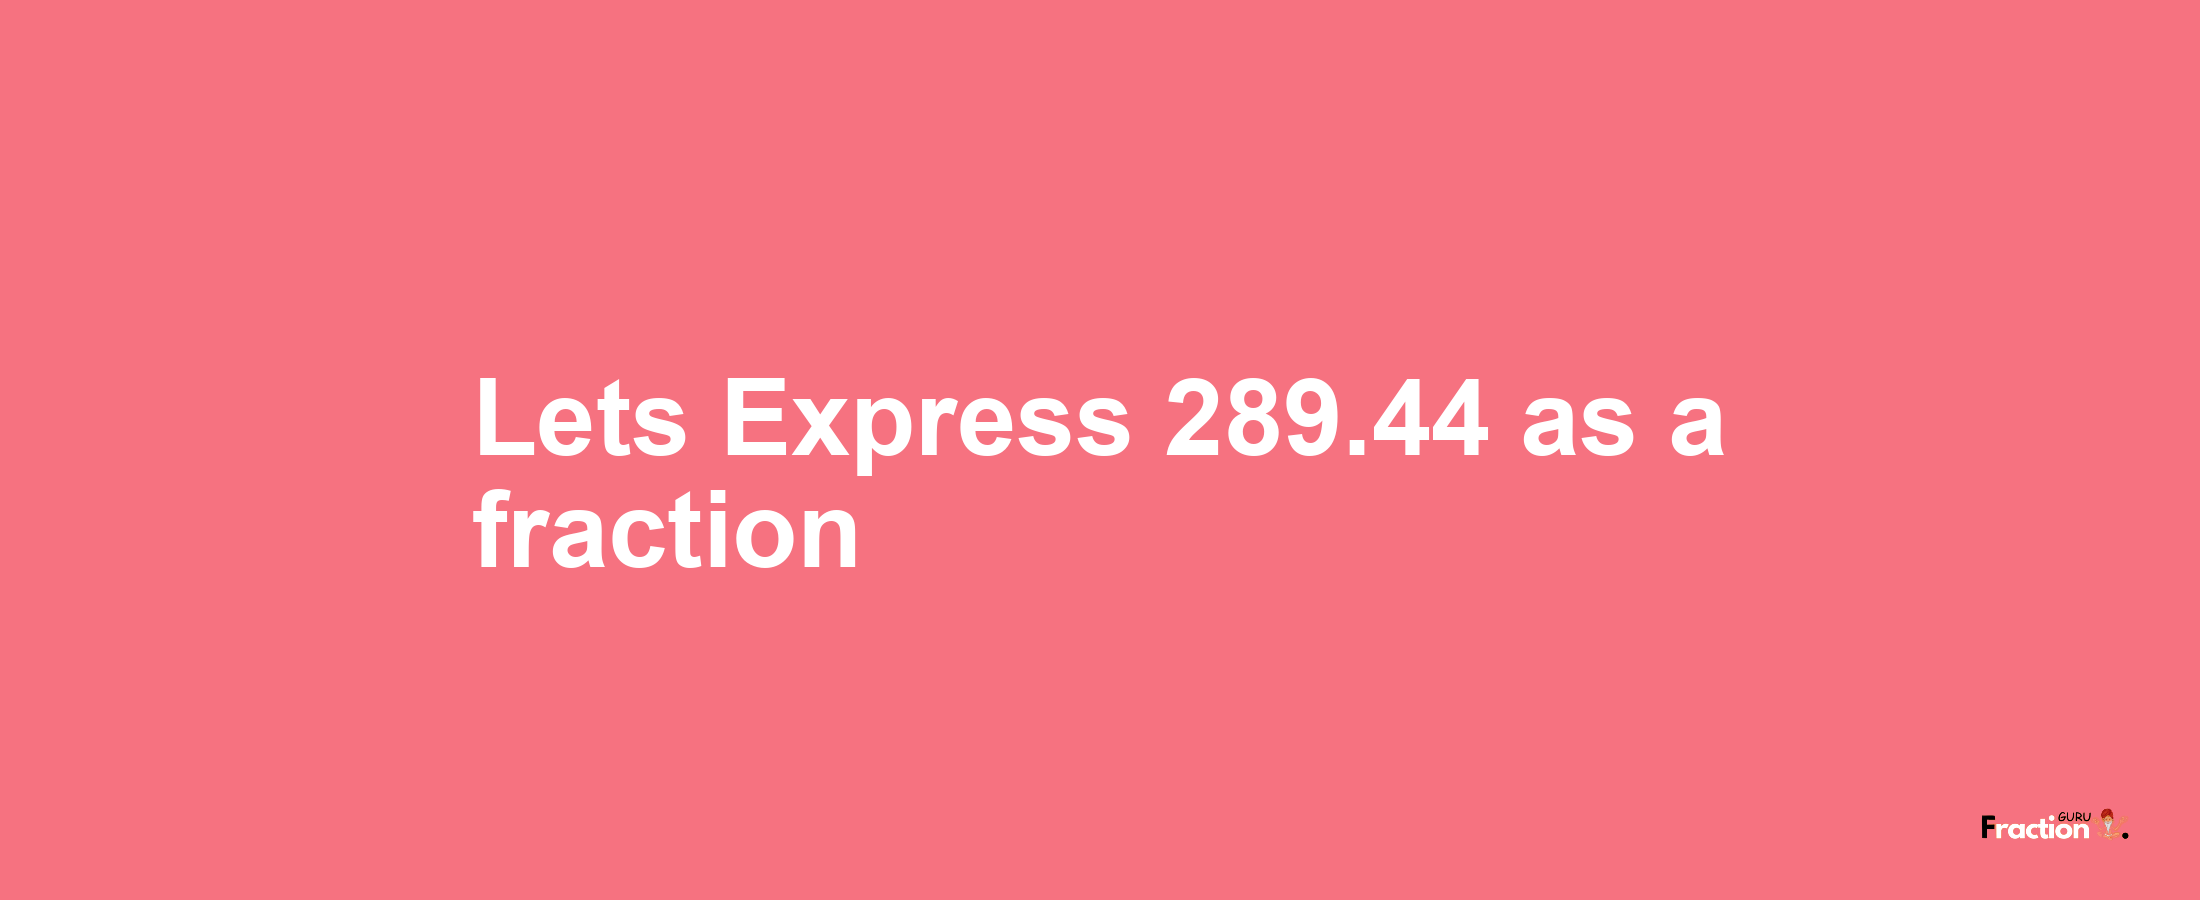 Lets Express 289.44 as afraction